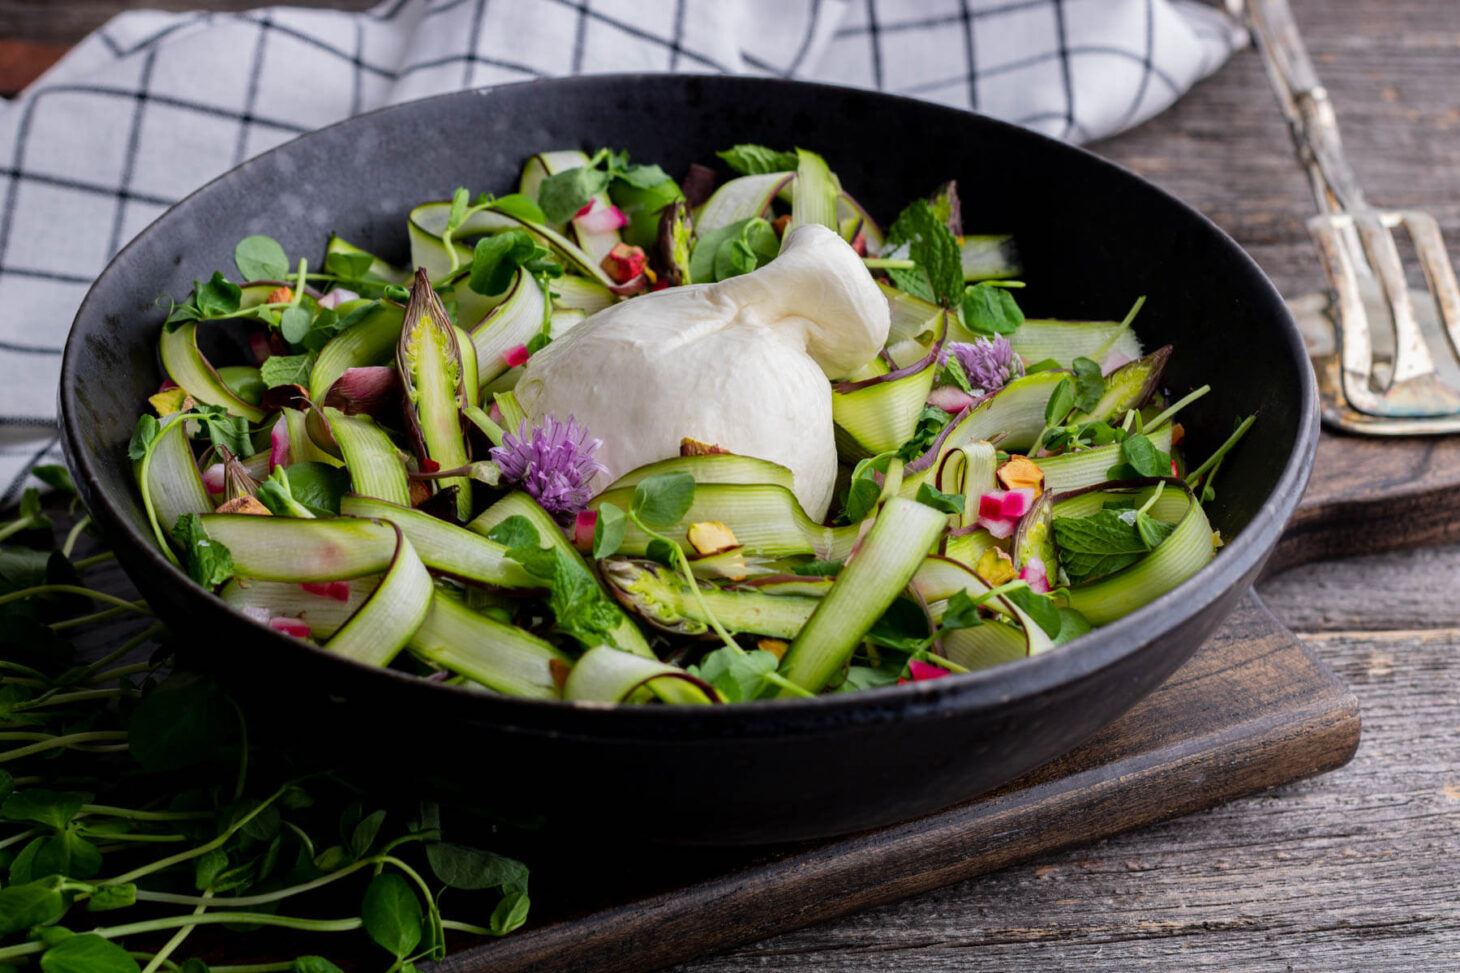 A wide black bowl filled with purple and green shaved asparagus salad, topped with a ball of fresh white burrata.